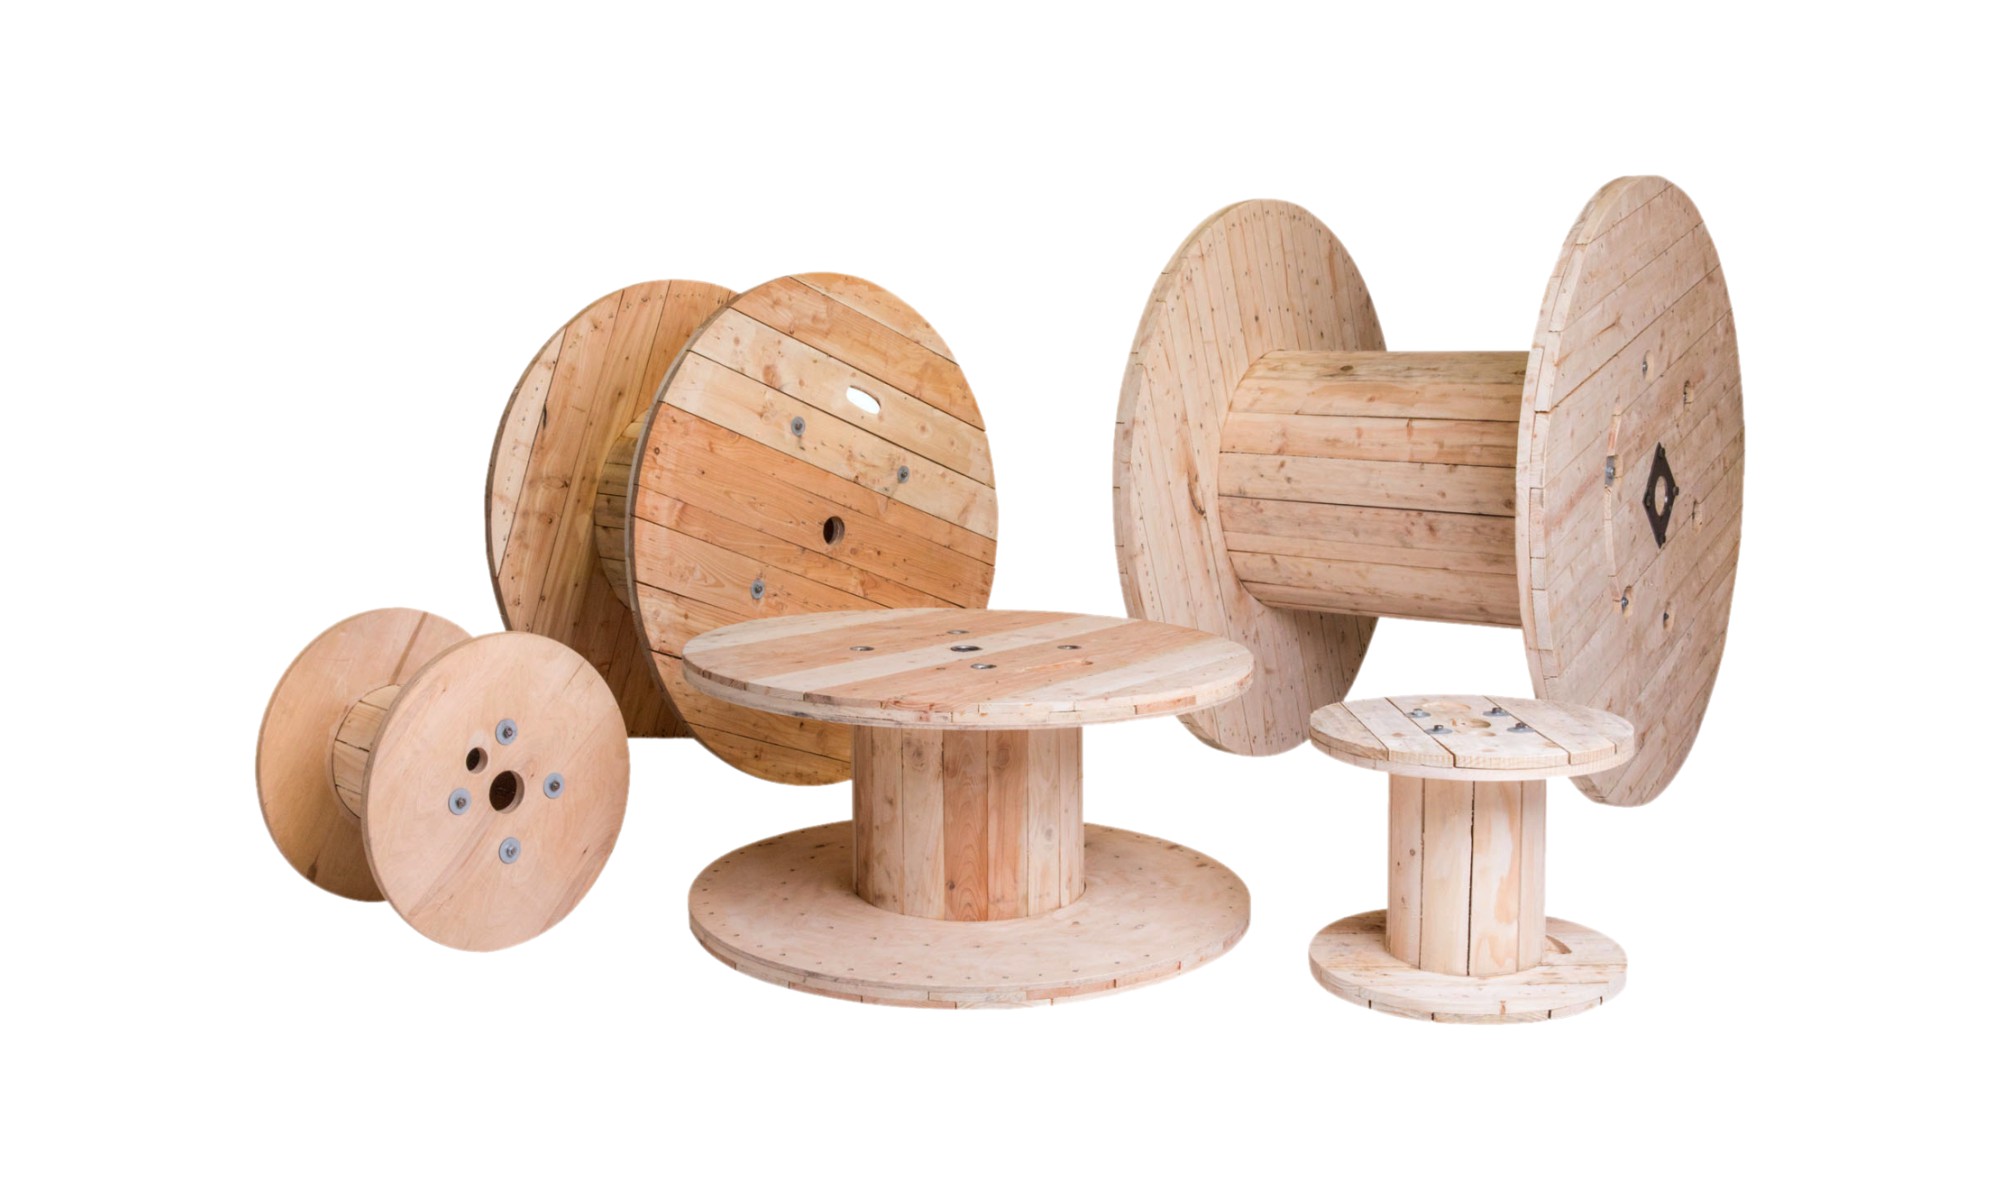 Wooden Timber Reels